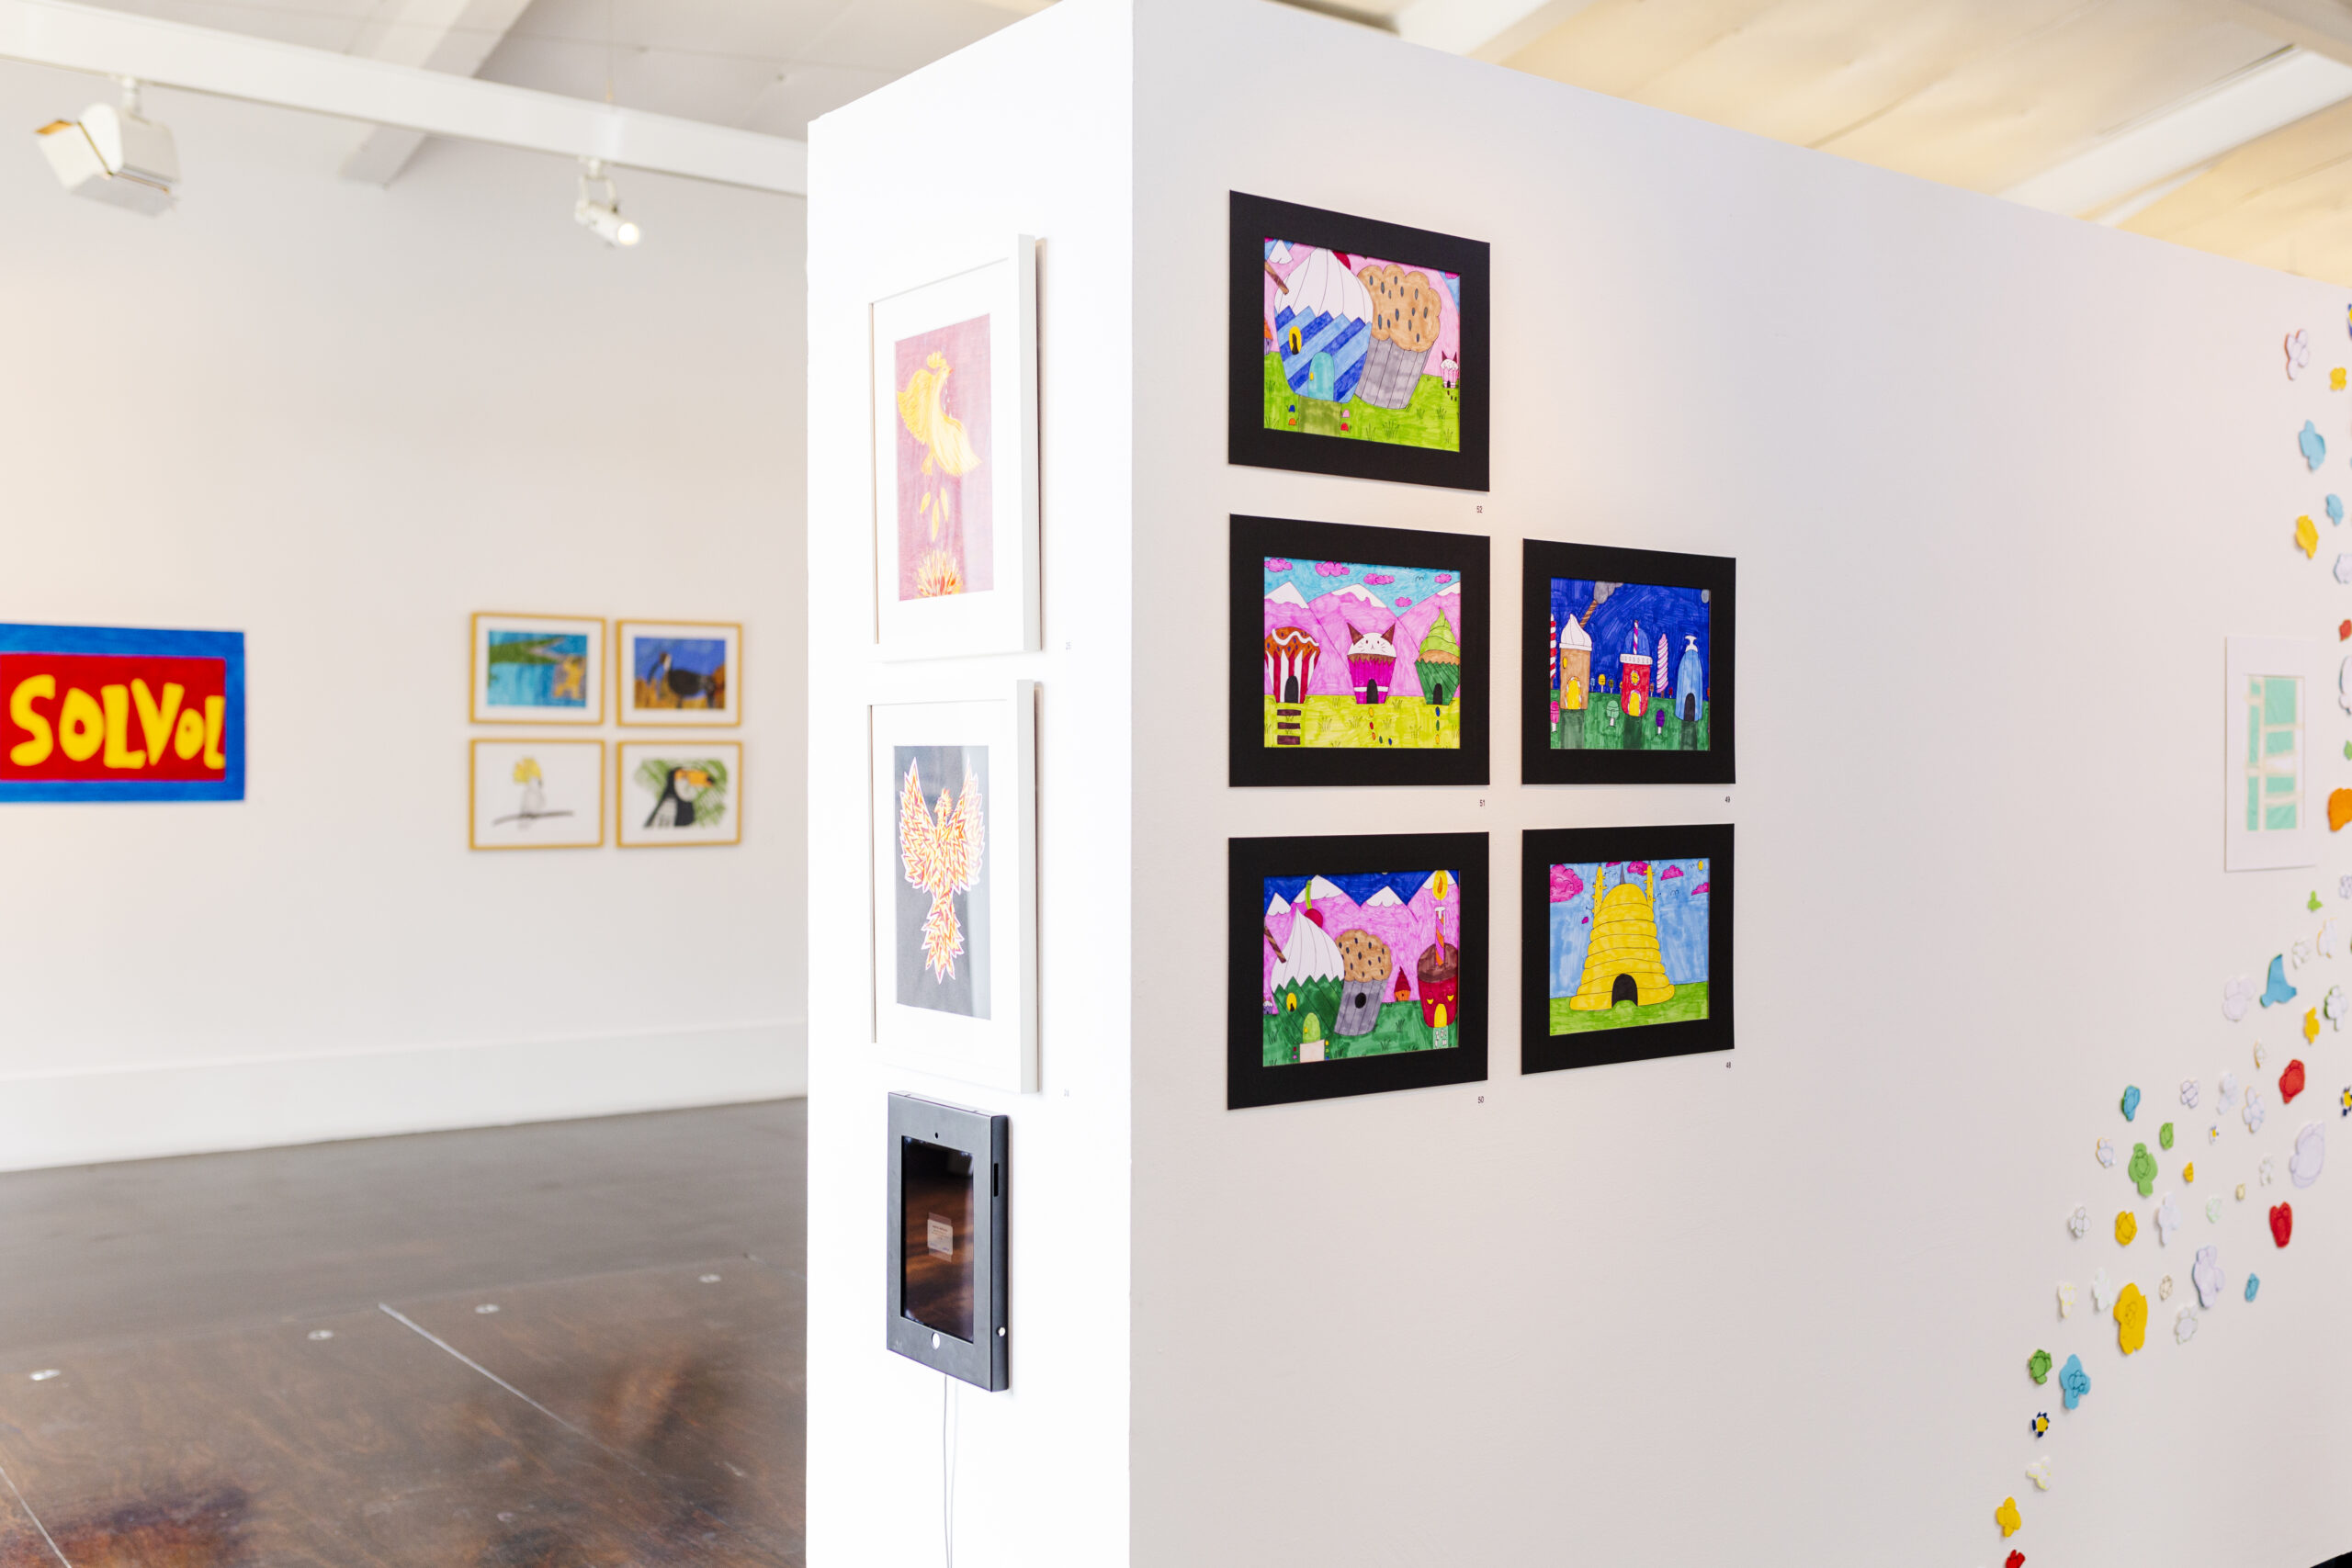 A series of Art works displayed in gallery on white walls. 